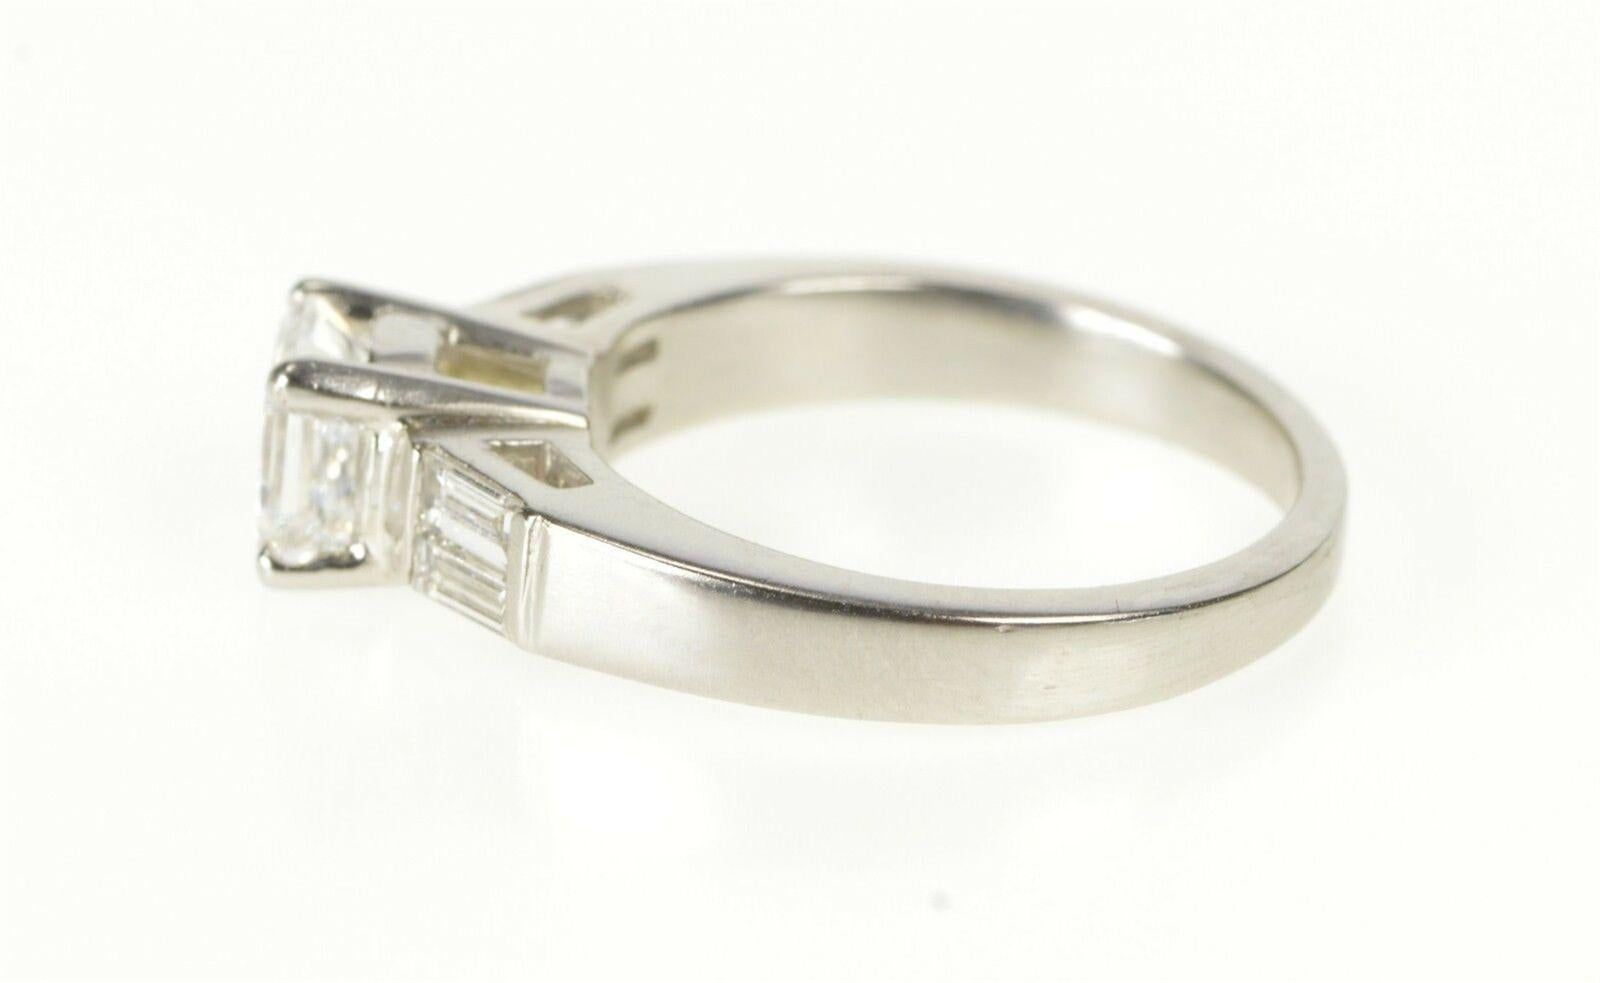 ·Item: Platinum GIA 1.02 Ascher E Color VS1 1.52 Ctw Emerald Cut Accent Diamond Engagement Ring Size 5.5 

·Era: Modern / 2000s  ·Composition: Platinum Marked/Tested 

·Gem Stone: GIA 1.02 Ascher E VS1 (Laser Inscribed GIA Cert Number on Girdle) ,